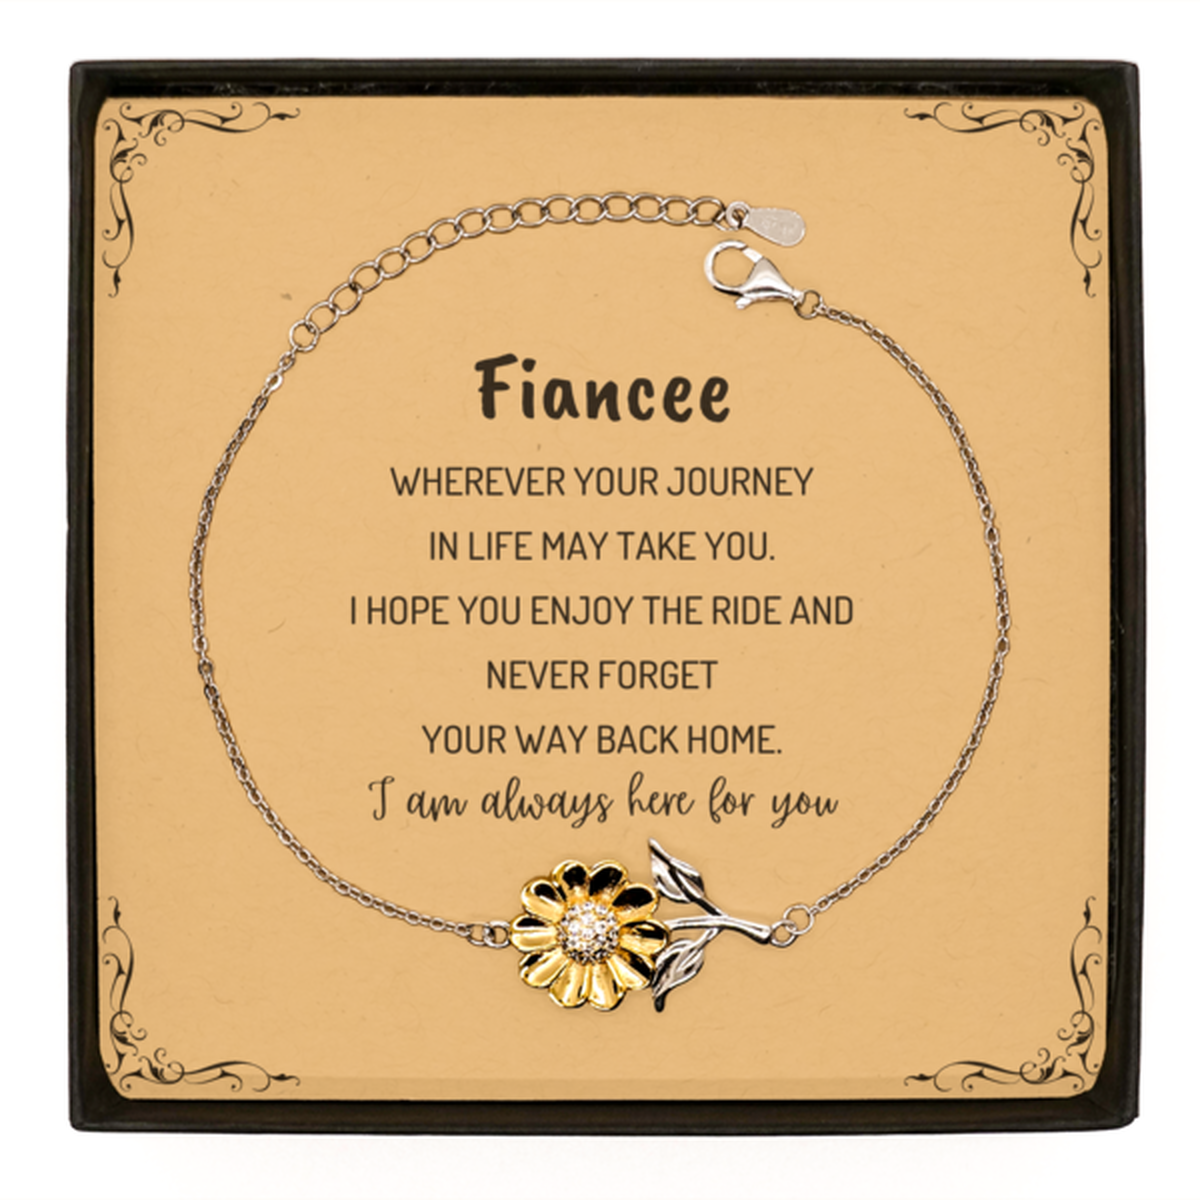 Fiancee wherever your journey in life may take you, I am always here for you Fiancee Sunflower Bracelet, Awesome Christmas Gifts For Fiancee Message Card, Fiancee Birthday Gifts for Men Women Family Loved One